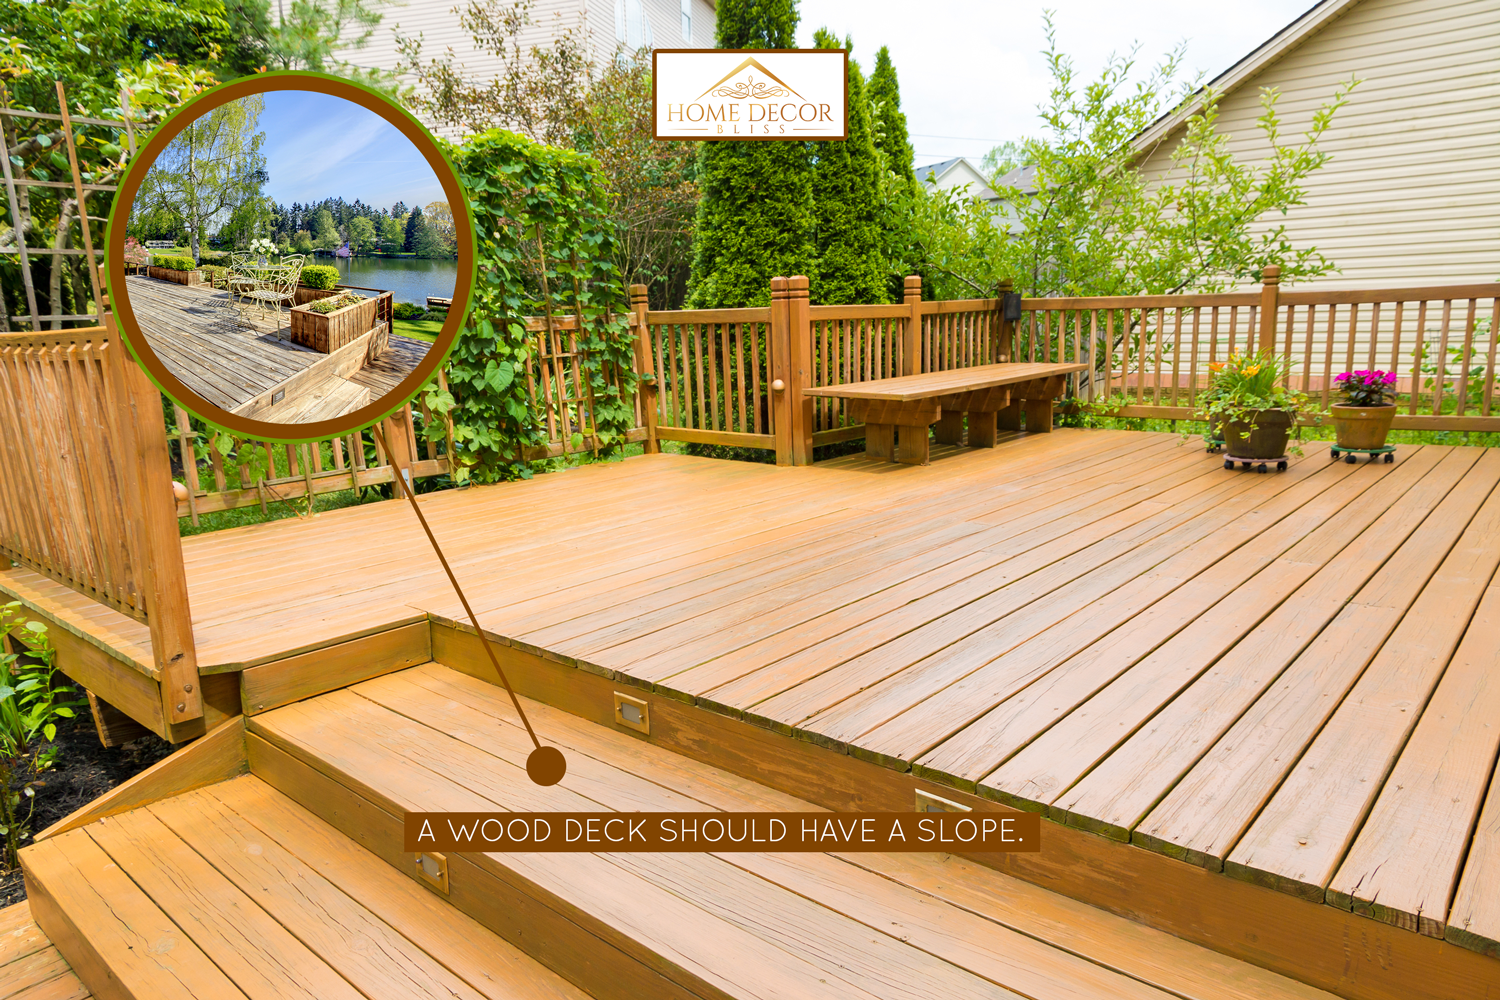 Wooden deck of family home - Should A Wood Deck Be Sloped